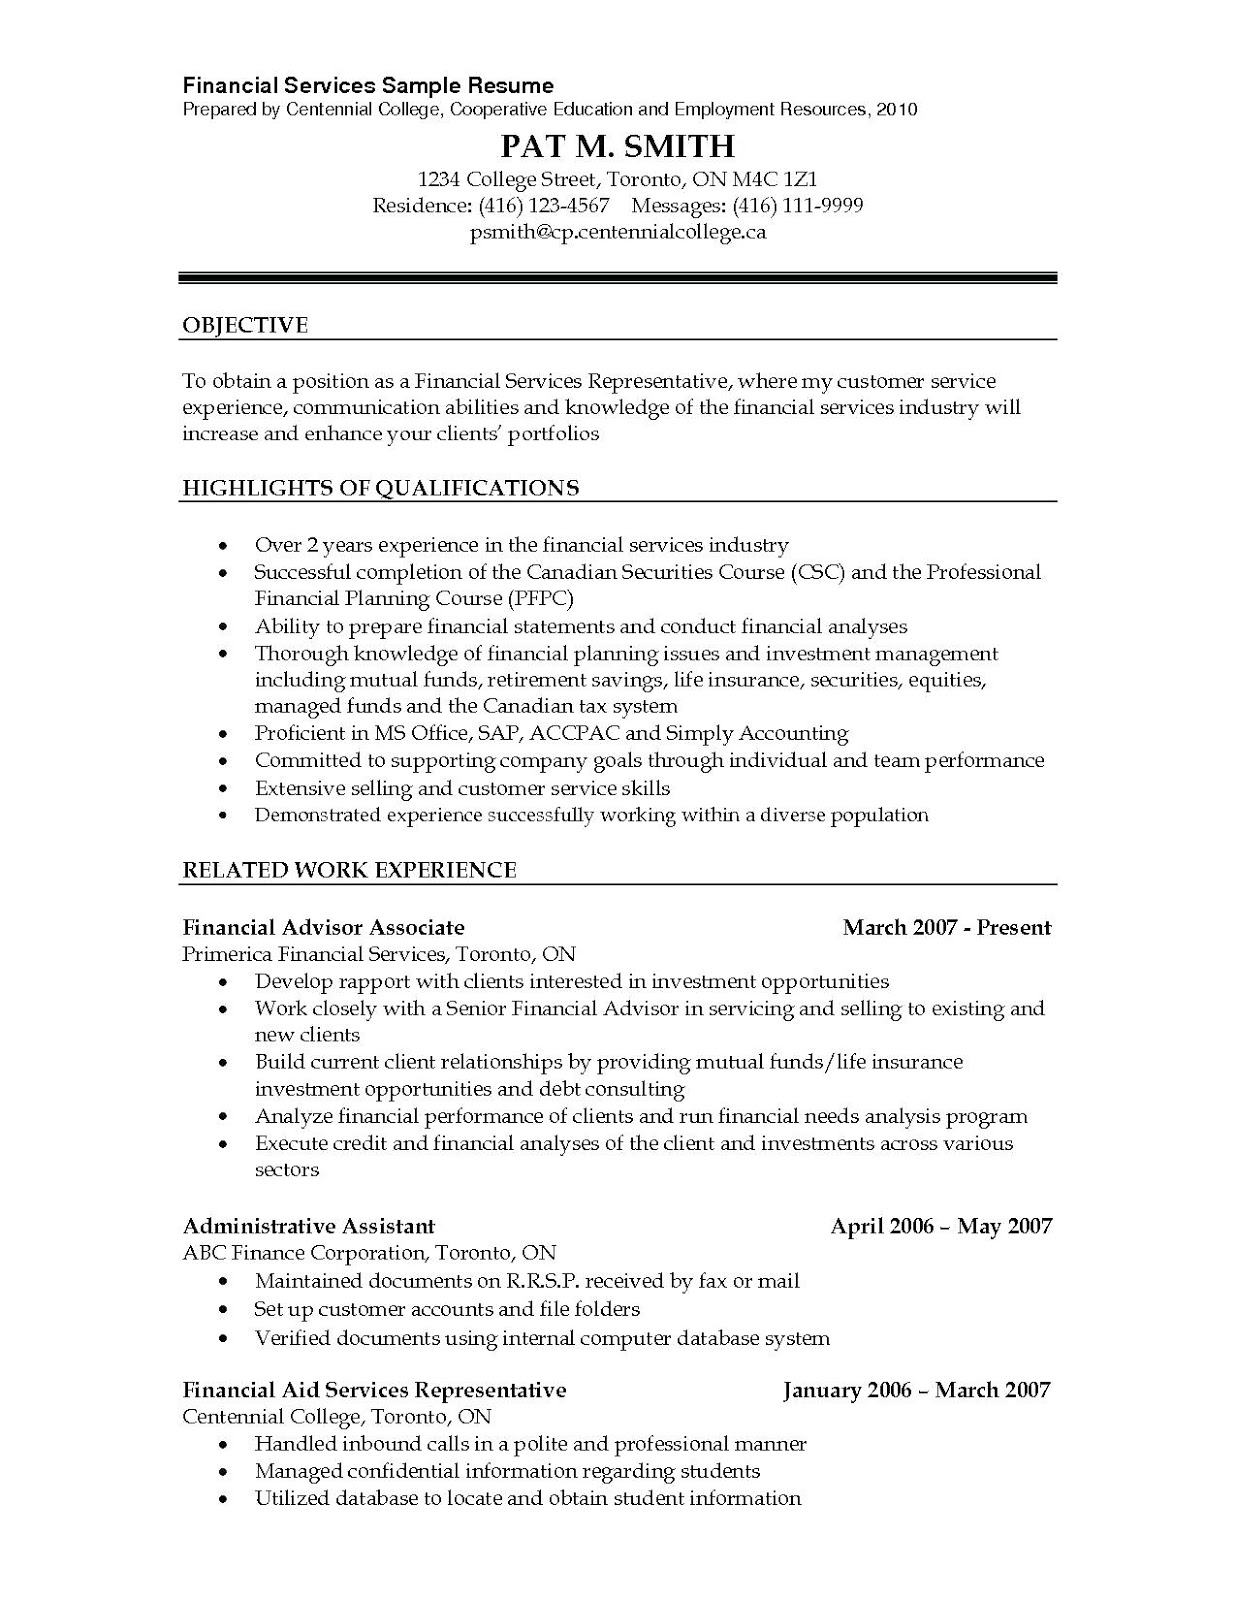 Banquet Captain Resume Samples 2019 Resume Examples 2020 banquet captain resume sample banquet captain duties resume banquet captain resume examples banquet captain job description for resume banquet captain job description resume banquet captain resume objective